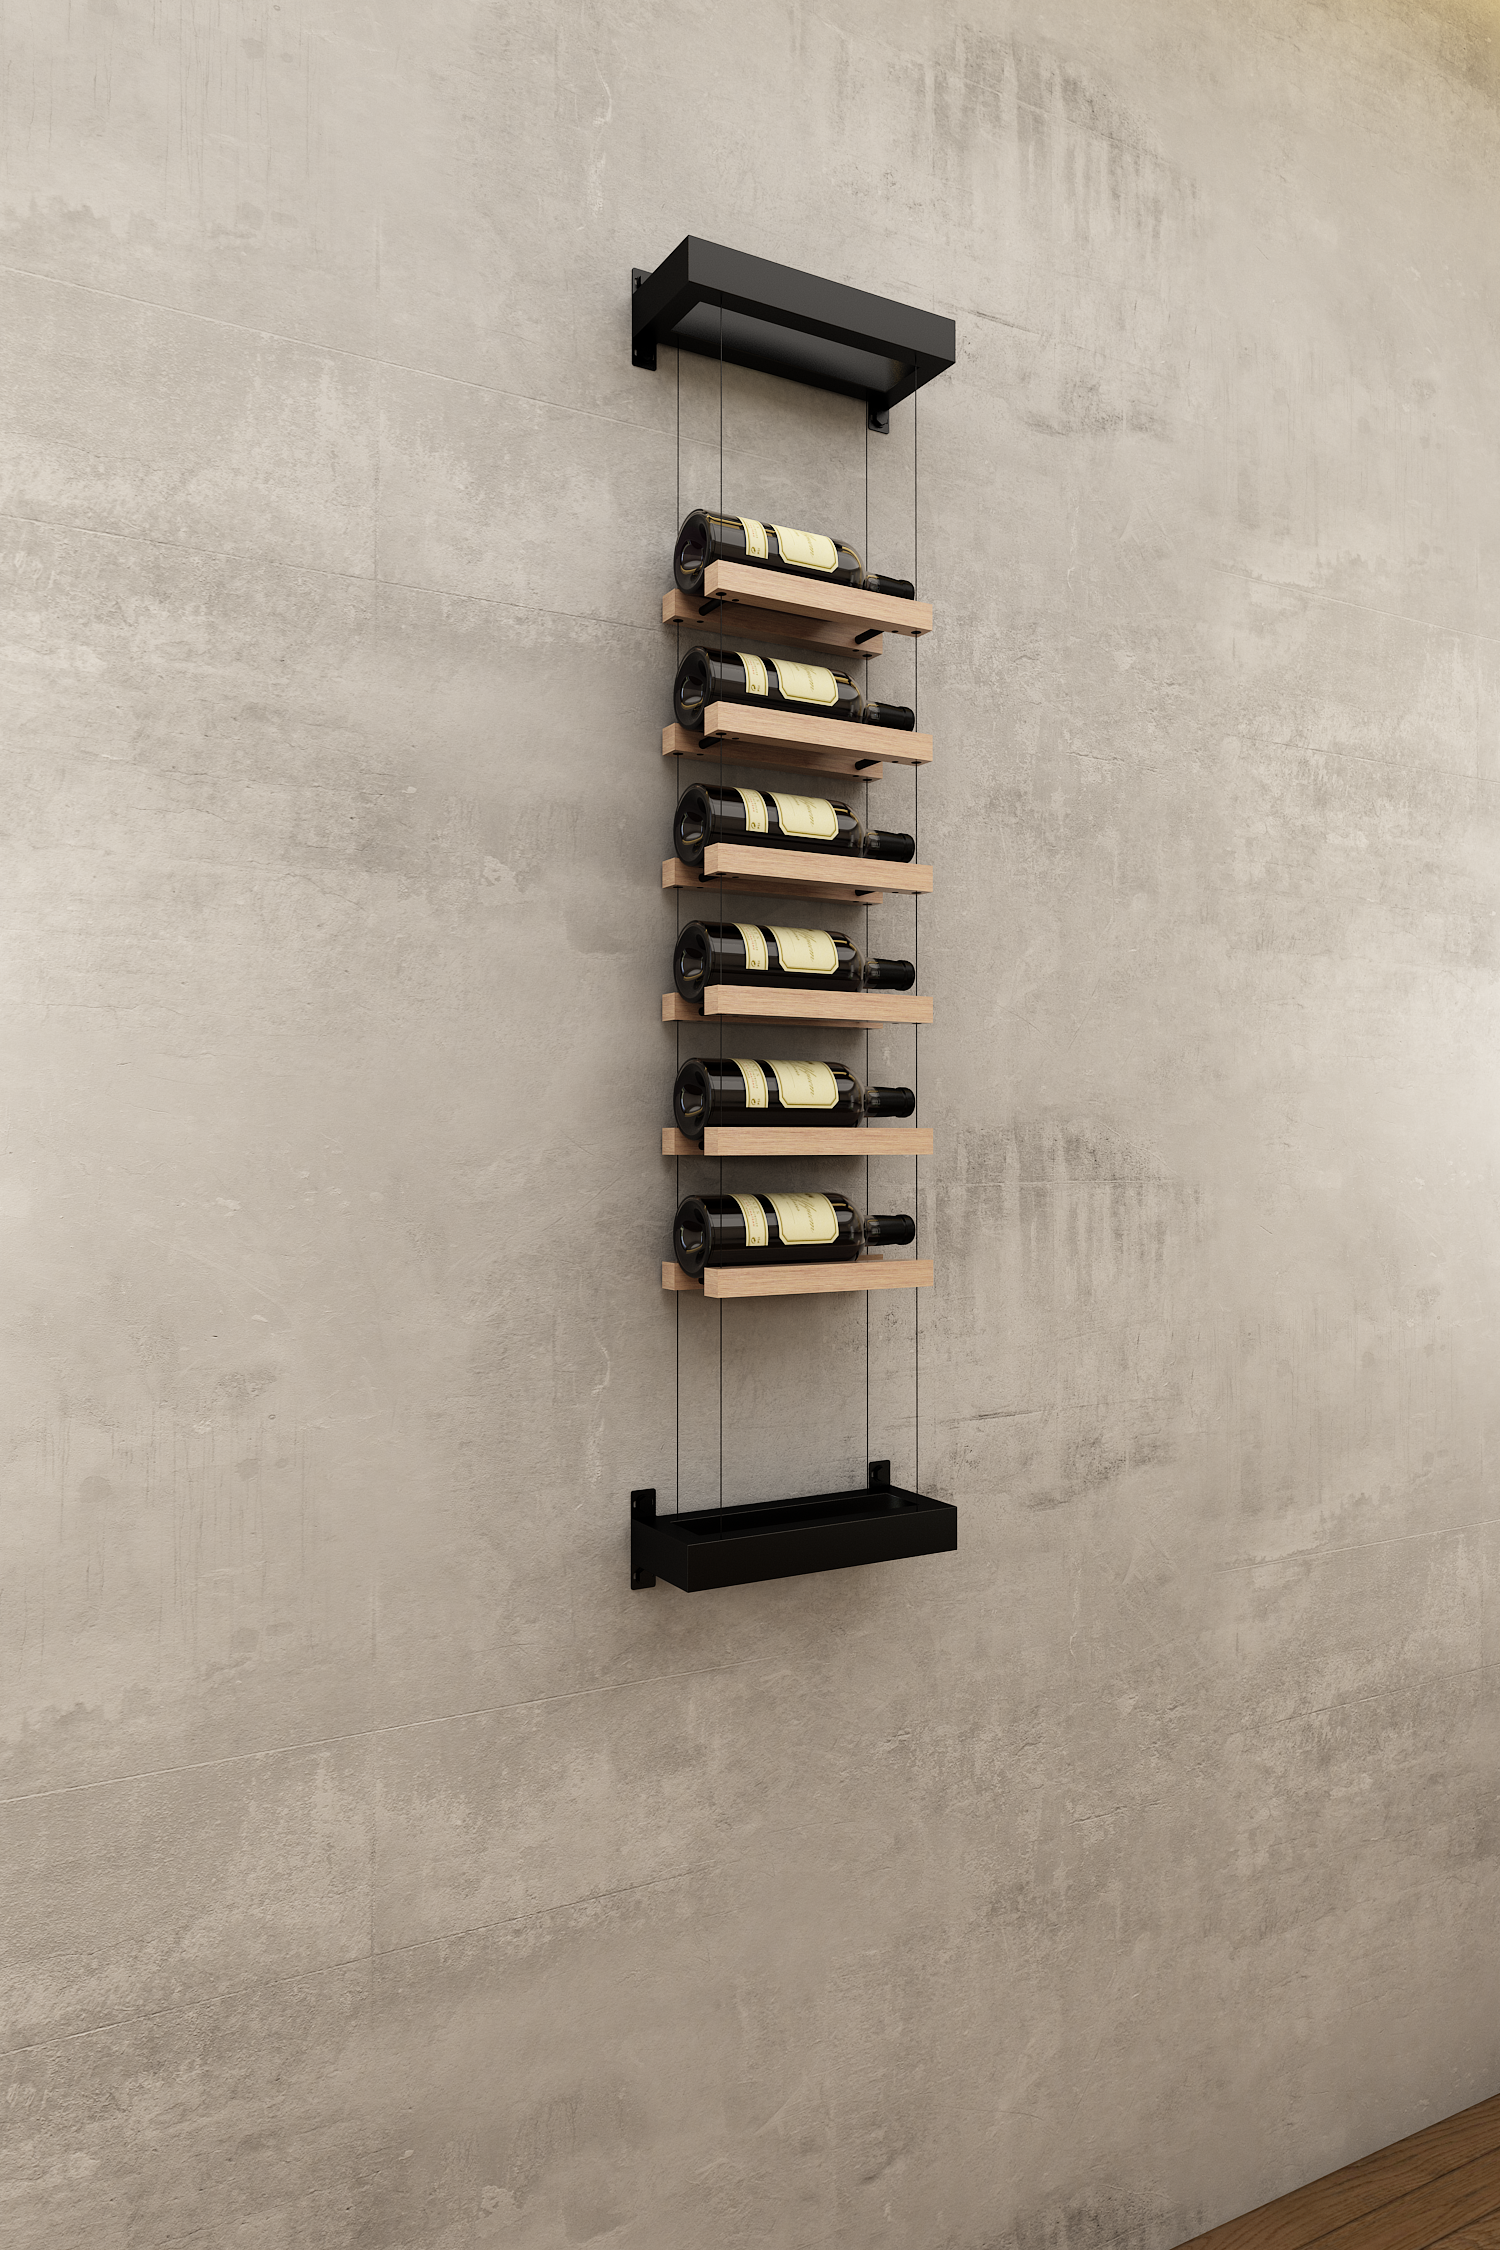 Single column above counter BUOYANT® wine cable wine rack with top and bottom wall mount